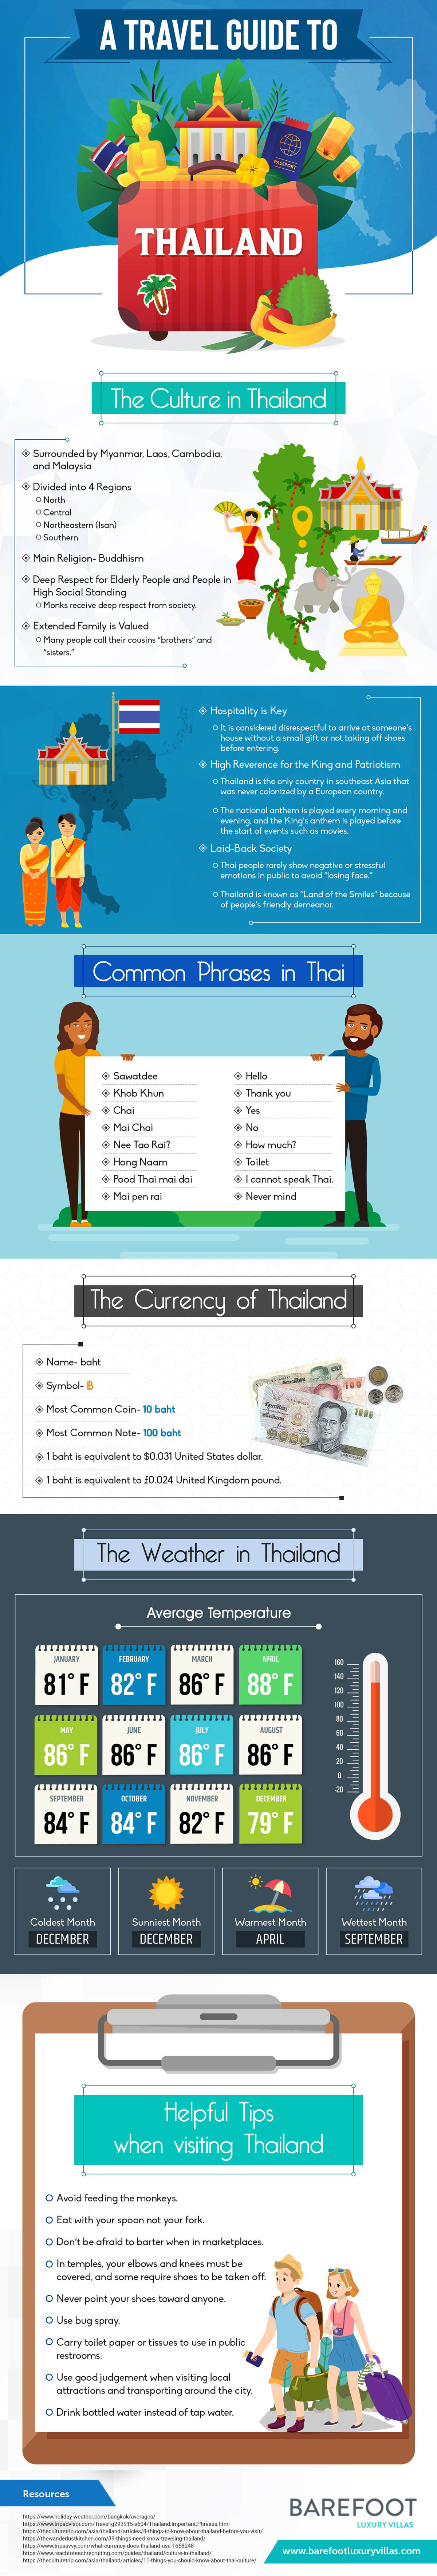 A Travel Guide to Thailand